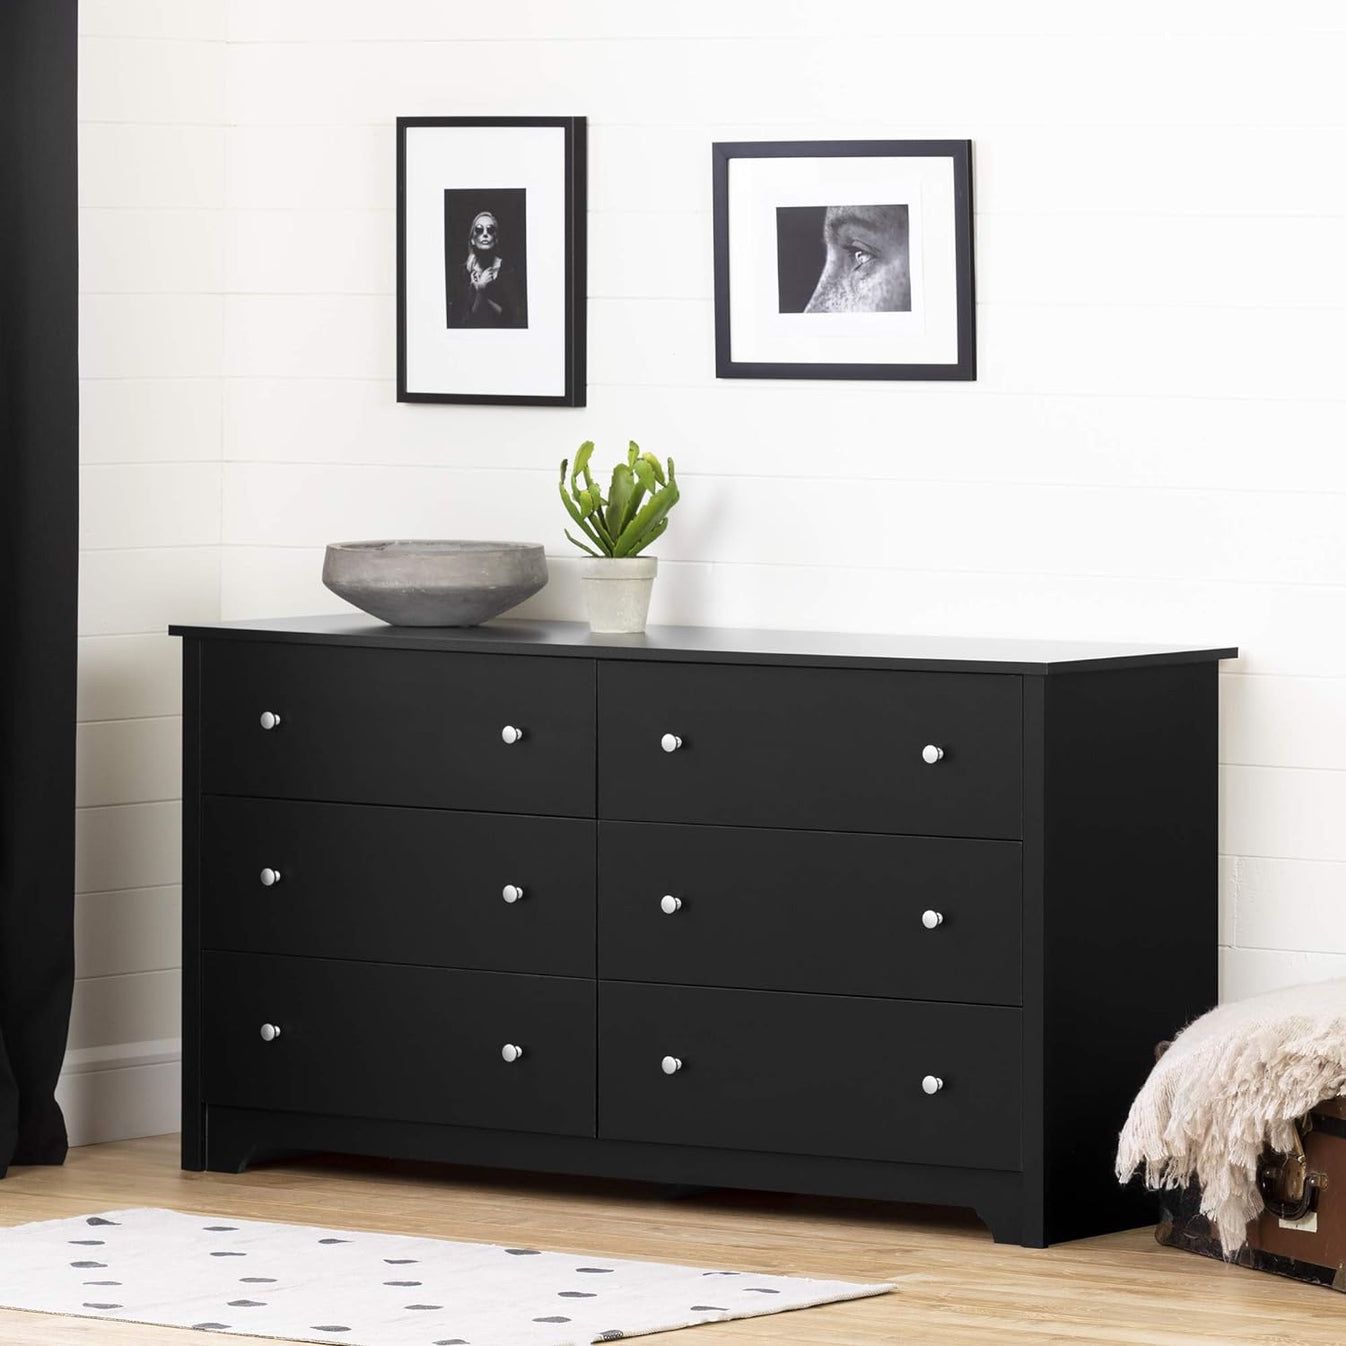 NEW w/ minor dmg - South Shore Vito Collection 6-Drawer Double Dresser, Black with Matte Nickel Handles, Pure Black - Retail $259